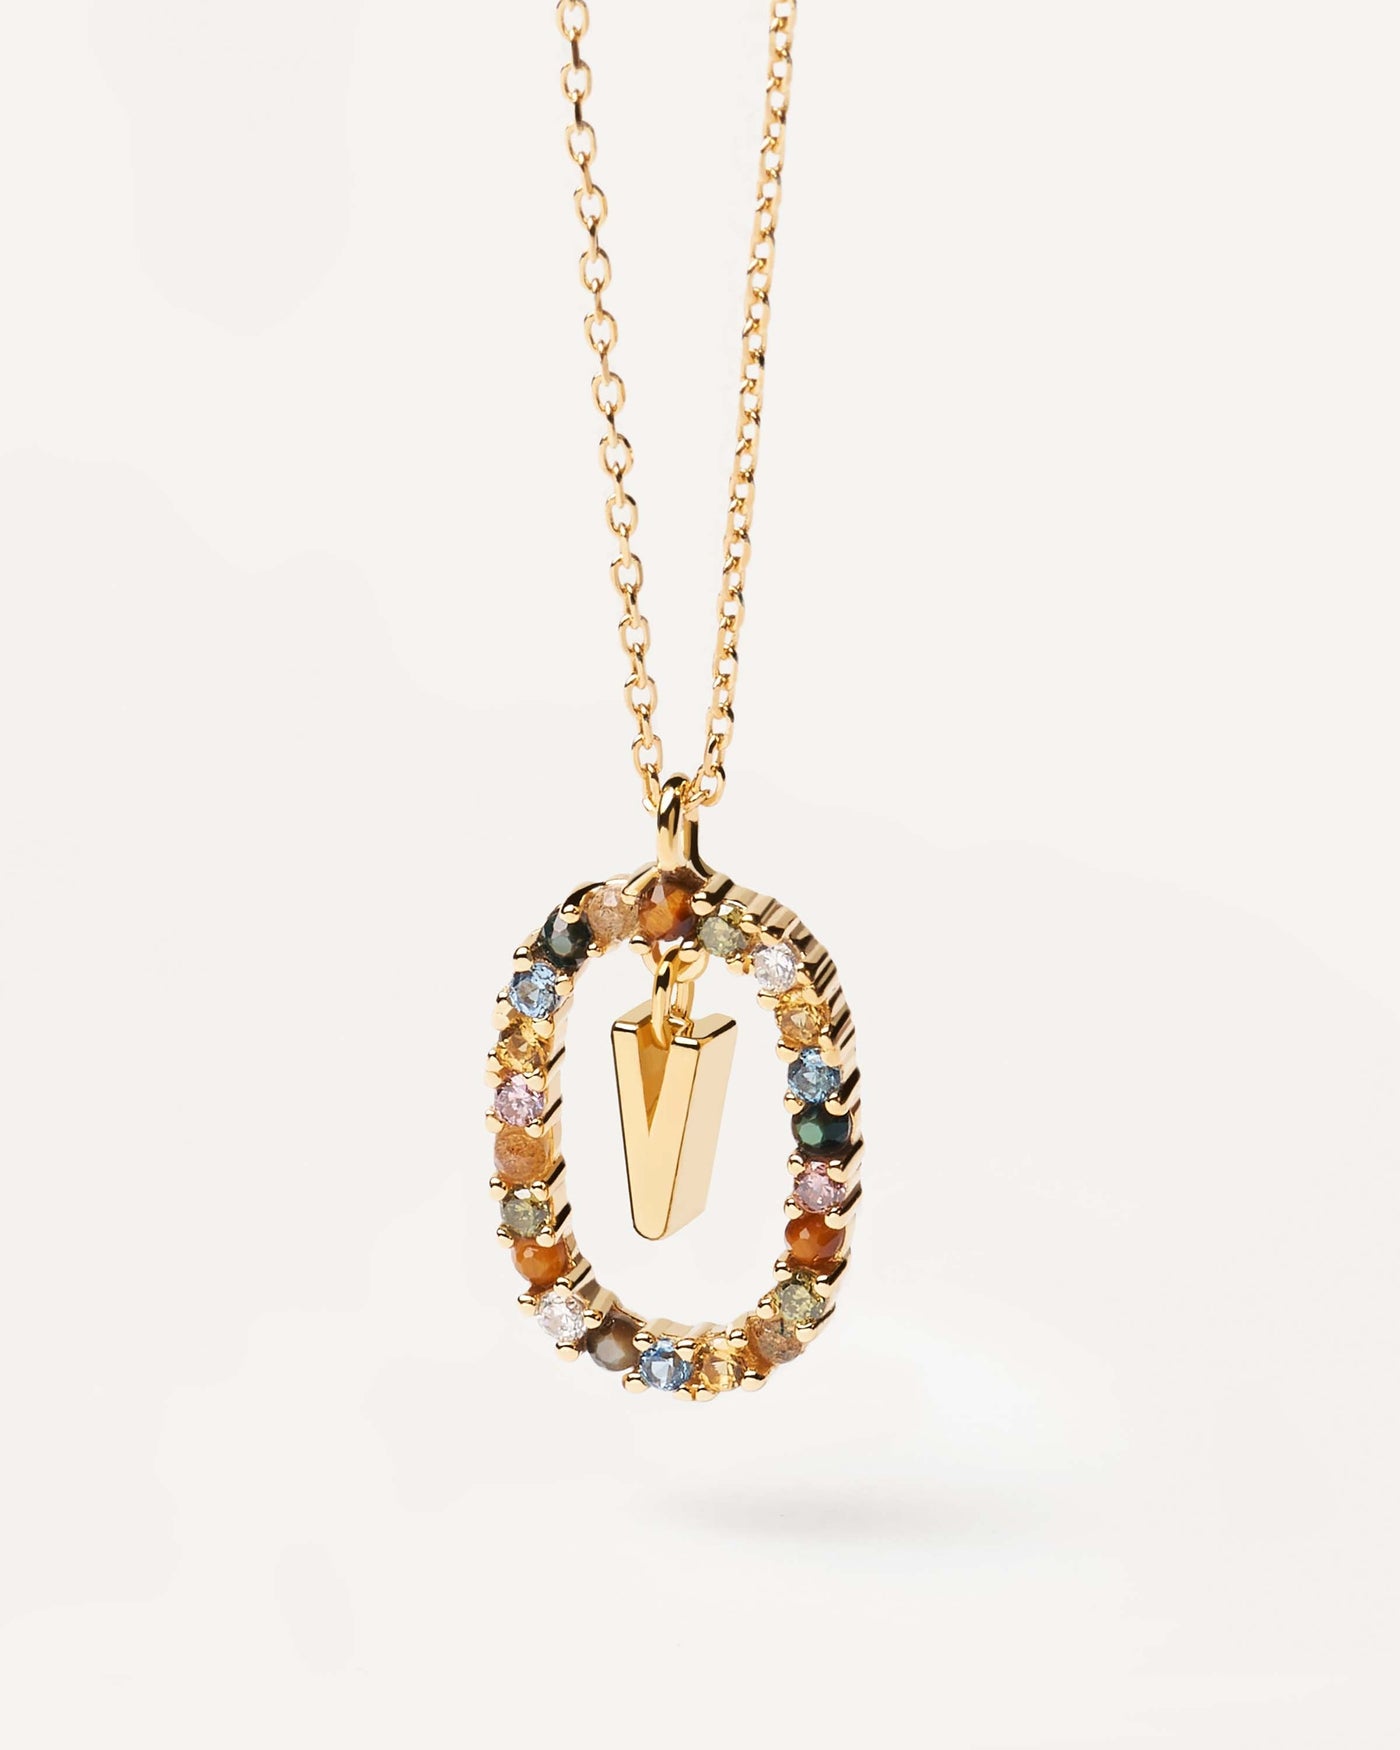 2023 Selection | Letter V necklace. Initial V necklace in gold-plated silver, circled by colorful gemstones. Get the latest arrival from PDPAOLA. Place your order safely and get this Best Seller. Free Shipping.